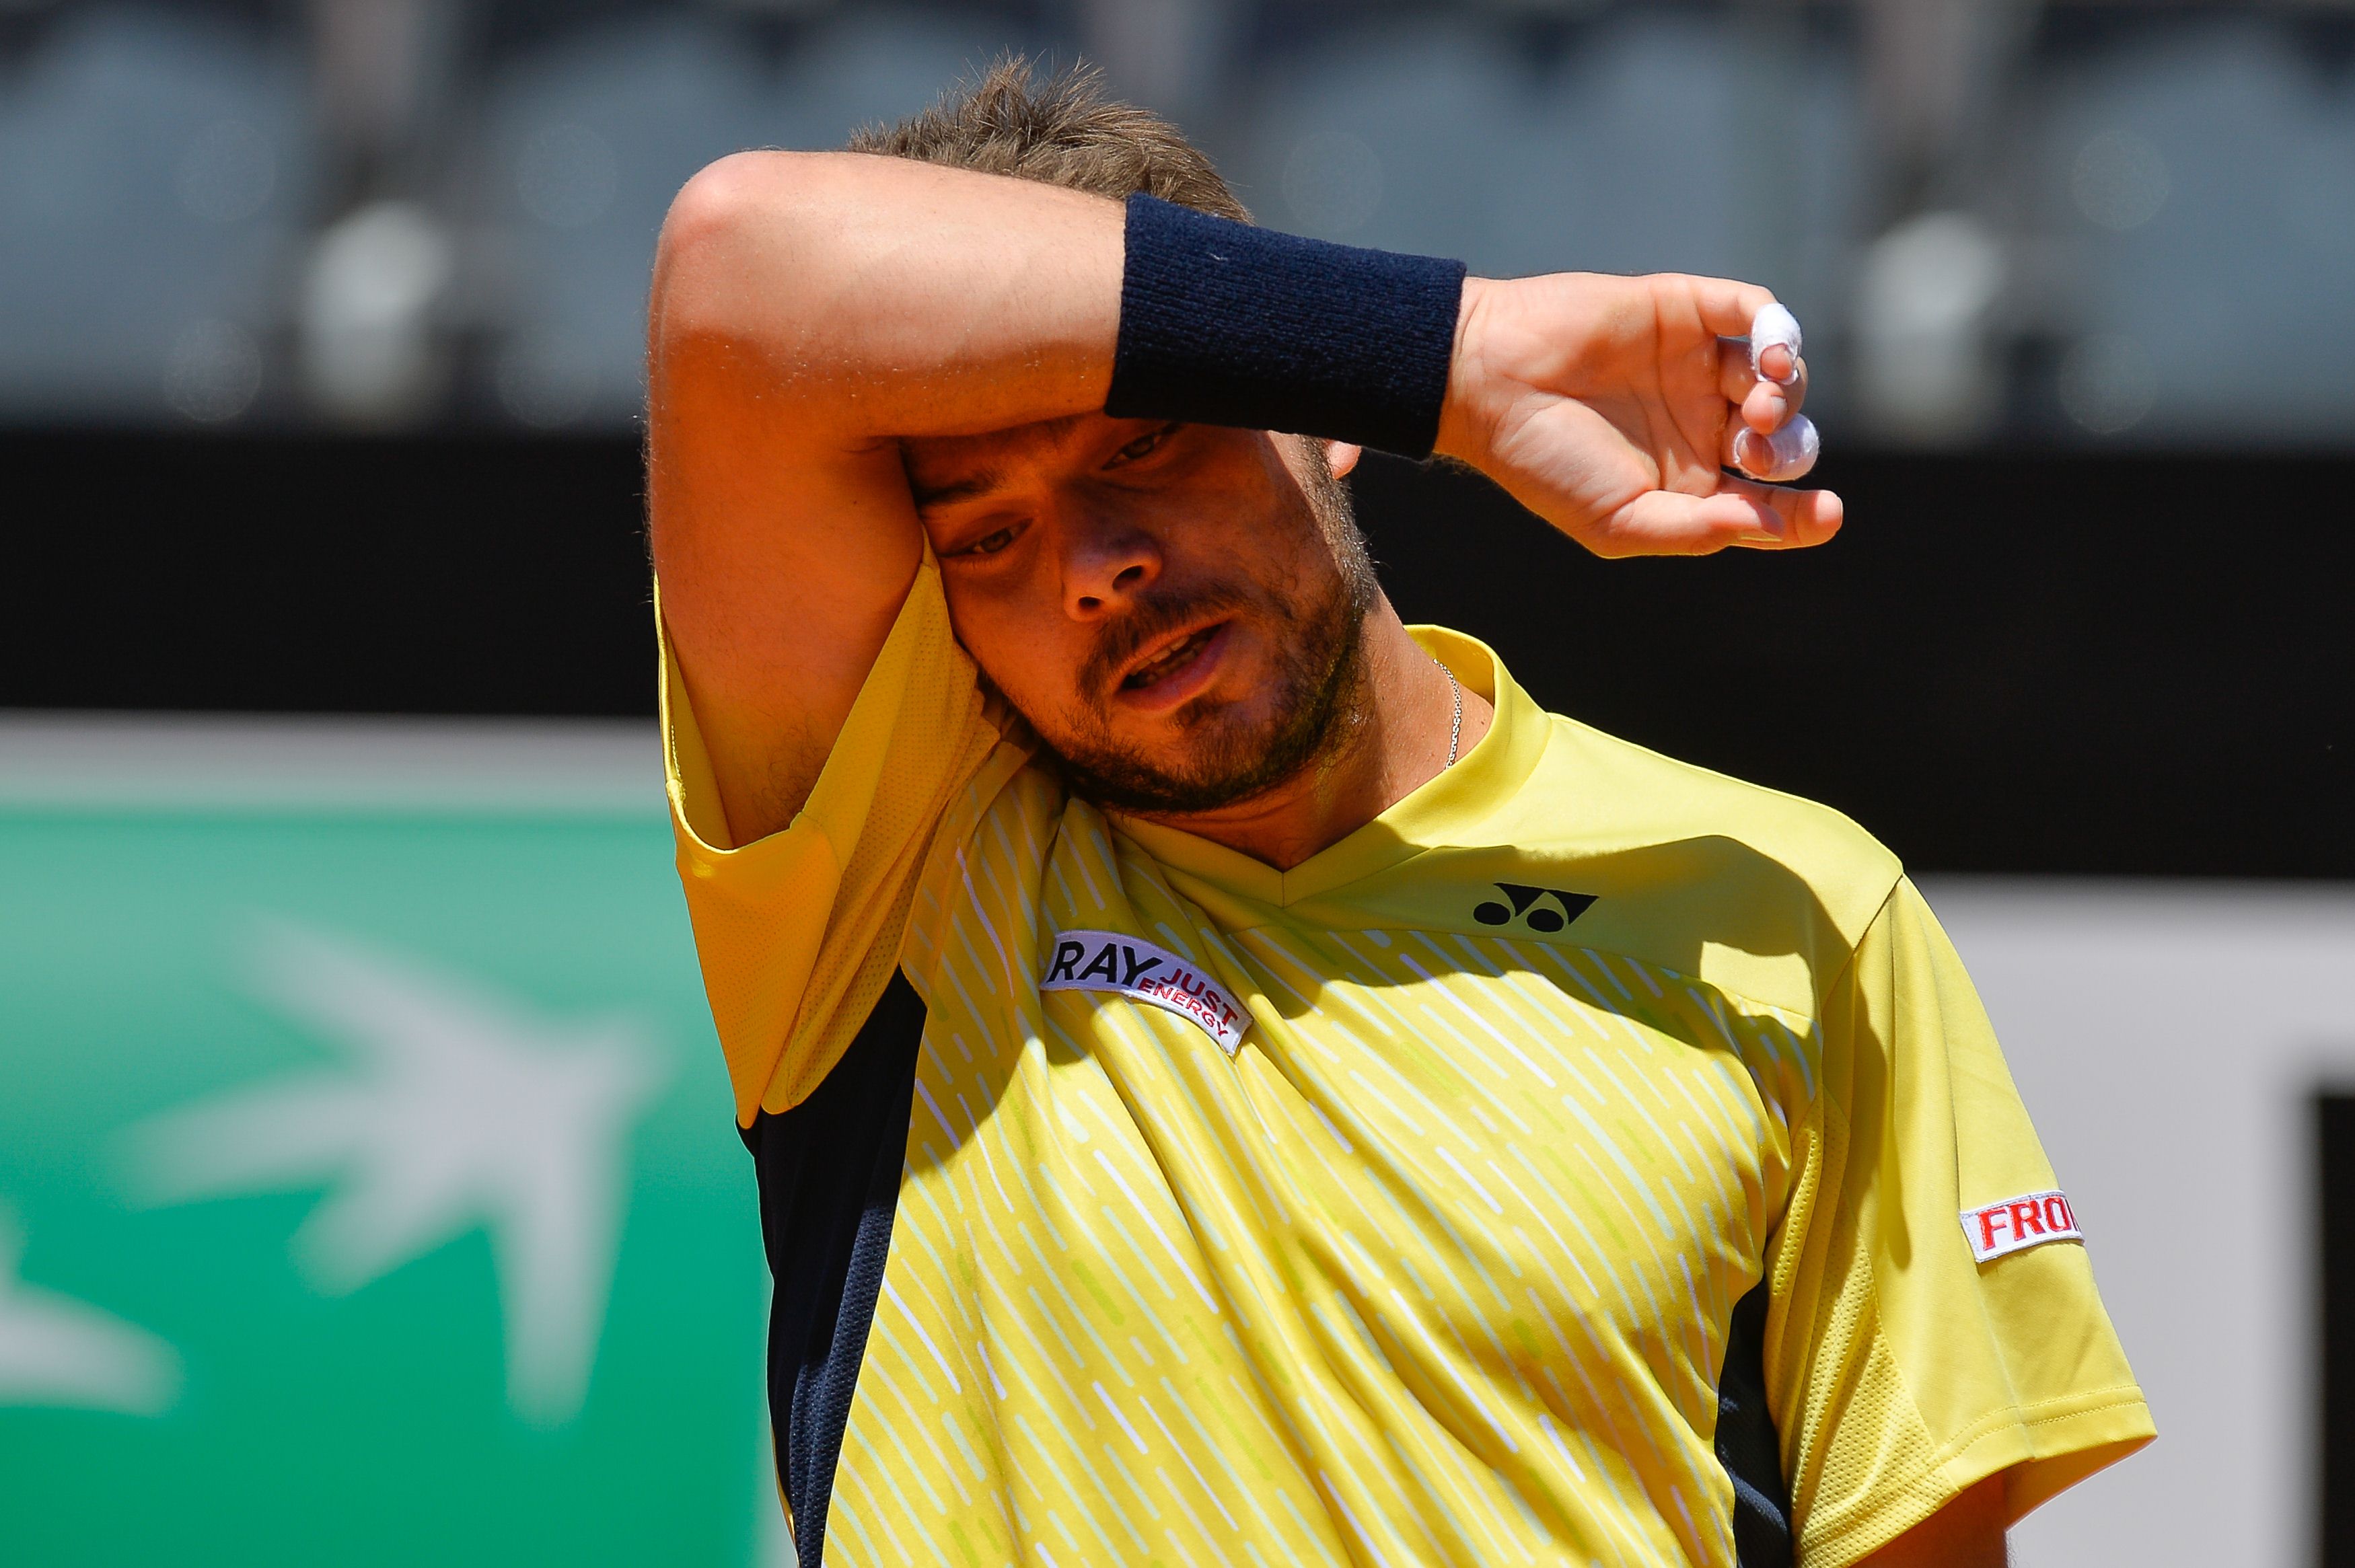 Switzerland's Stanislas Wawrinka reacts after a point against Tommy Haas at the Foro Italico in Rome. Photo: AFP